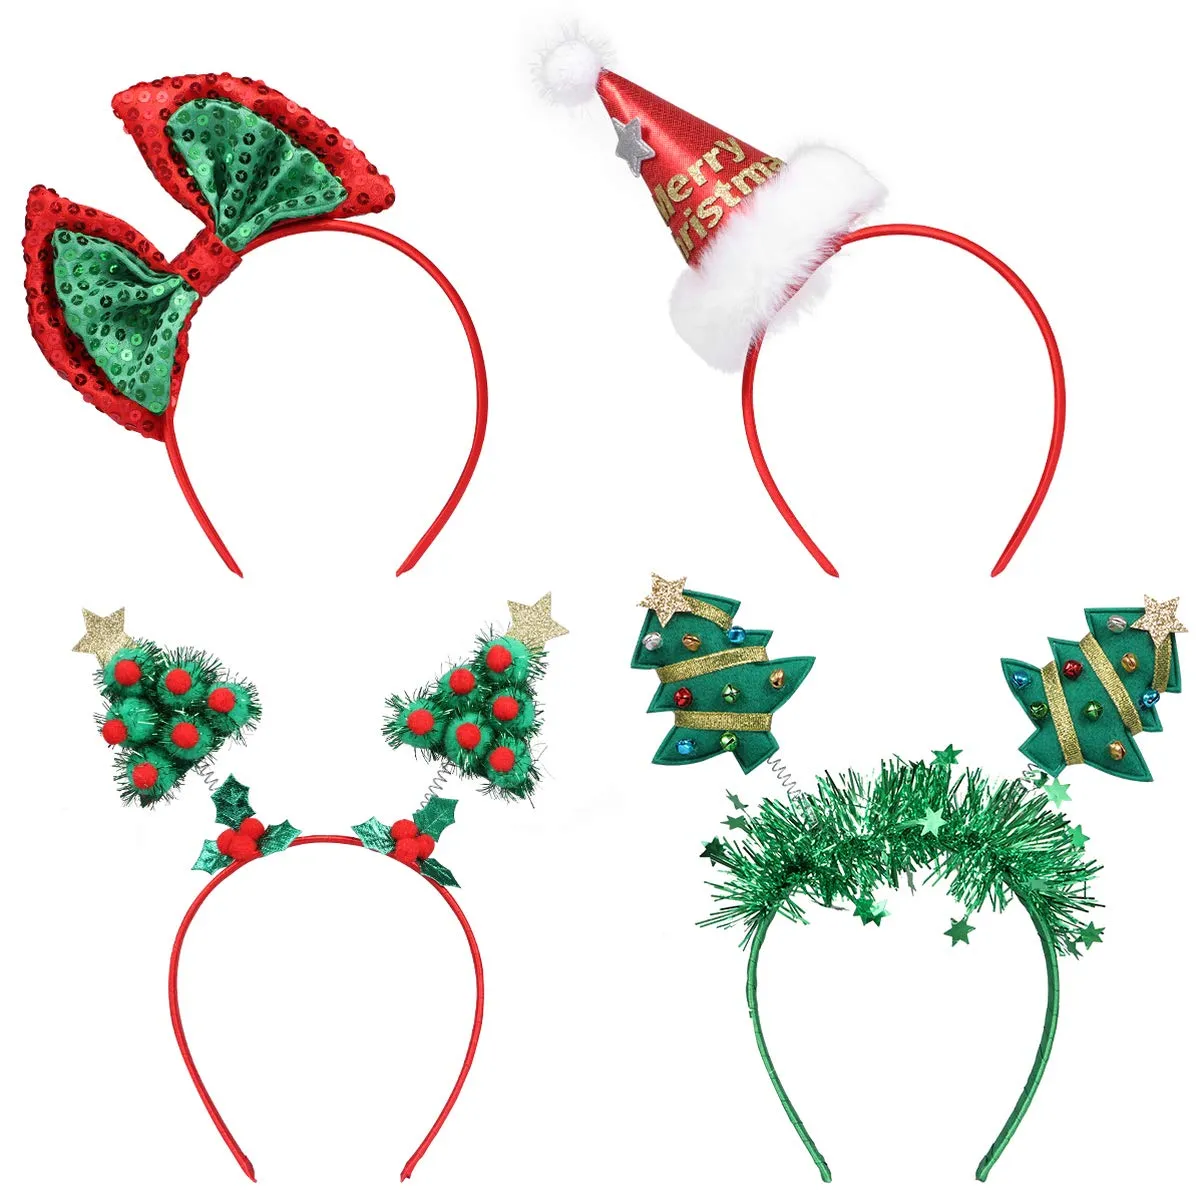 3ml creative holiday headbands christmas party costume headwear elves party hats reindeer headbands for christmas accessory